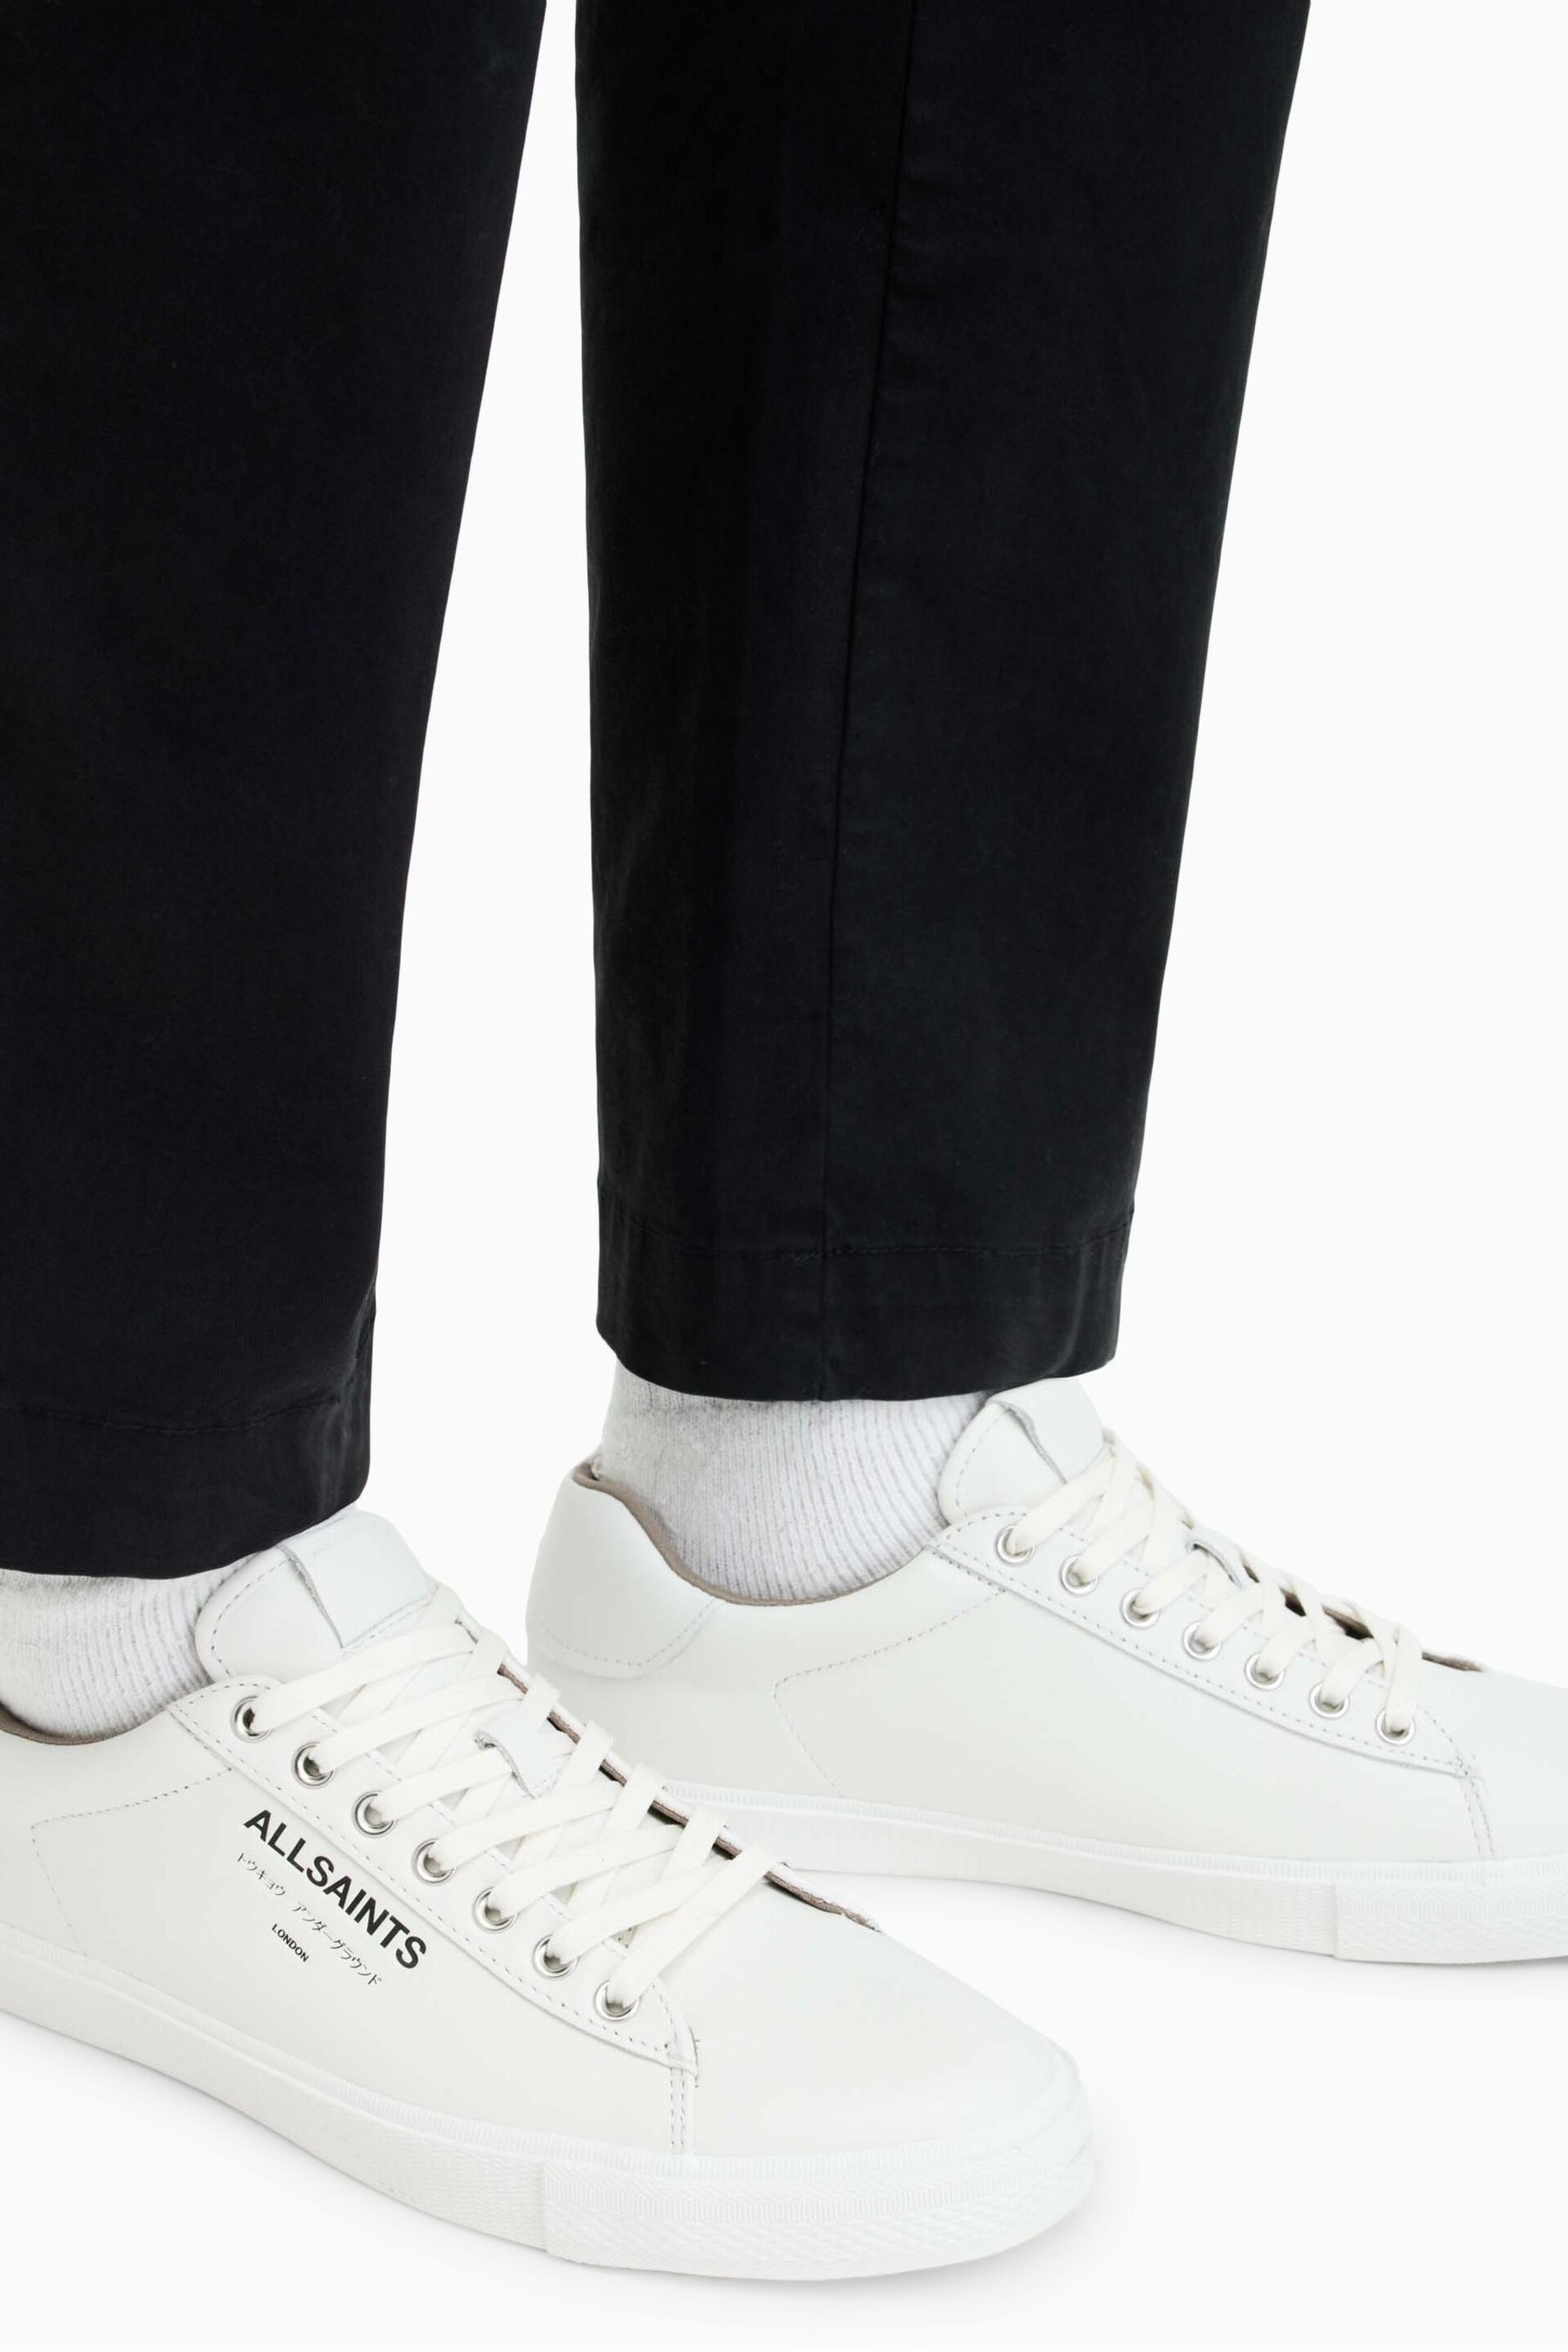 AllSaints White Underground Leather Low Top Trainers - Image 7 of 7